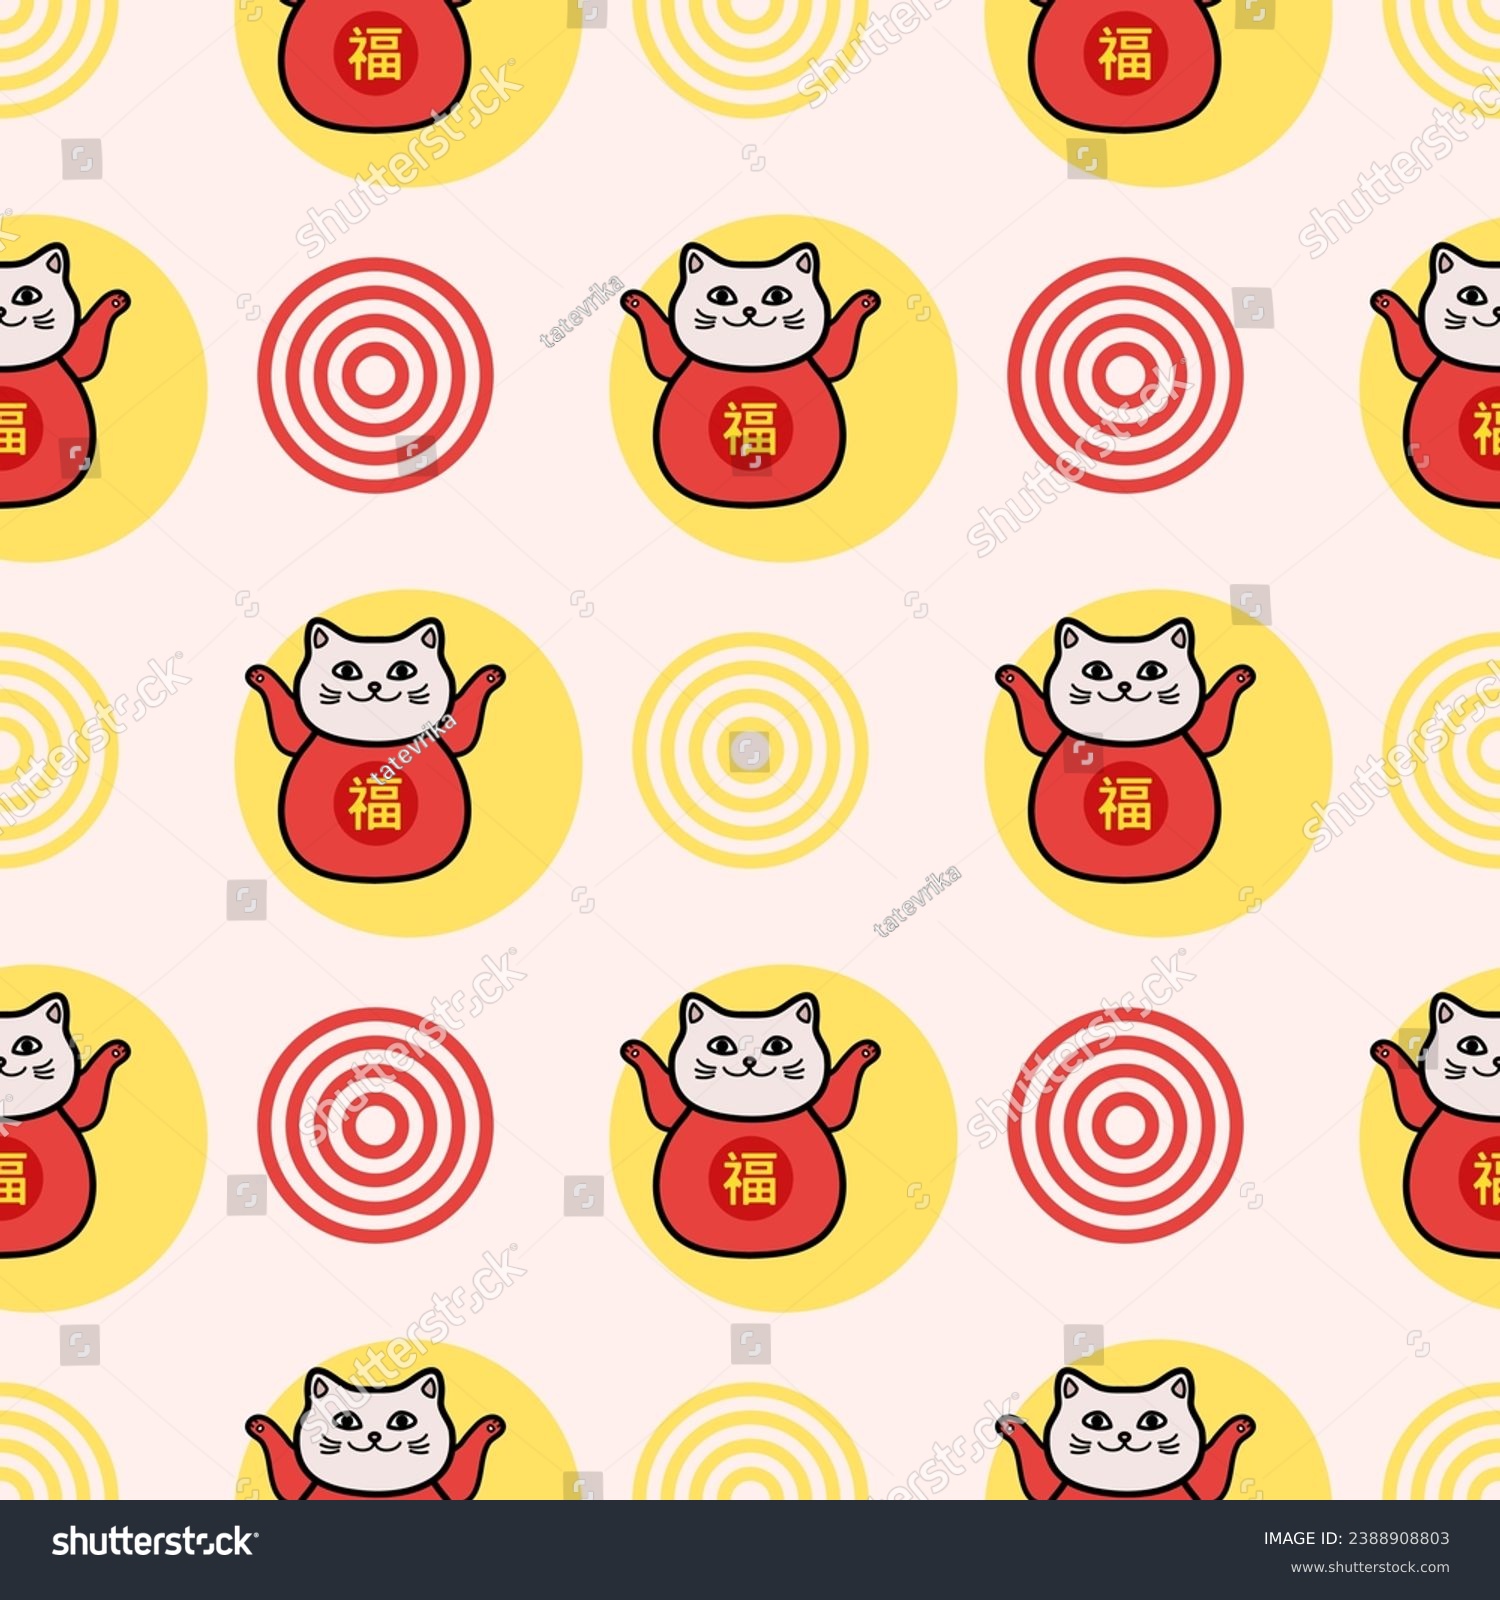 SVG of Maneki Neko Lucky Cat in Japan and China Seamless Background for Web, Mobile, Card, Sticker, T-Shirt, Textile Bag and Garment. Hieroglyphic Inscriptions Mean Happiness, Prosperity, Luck. svg